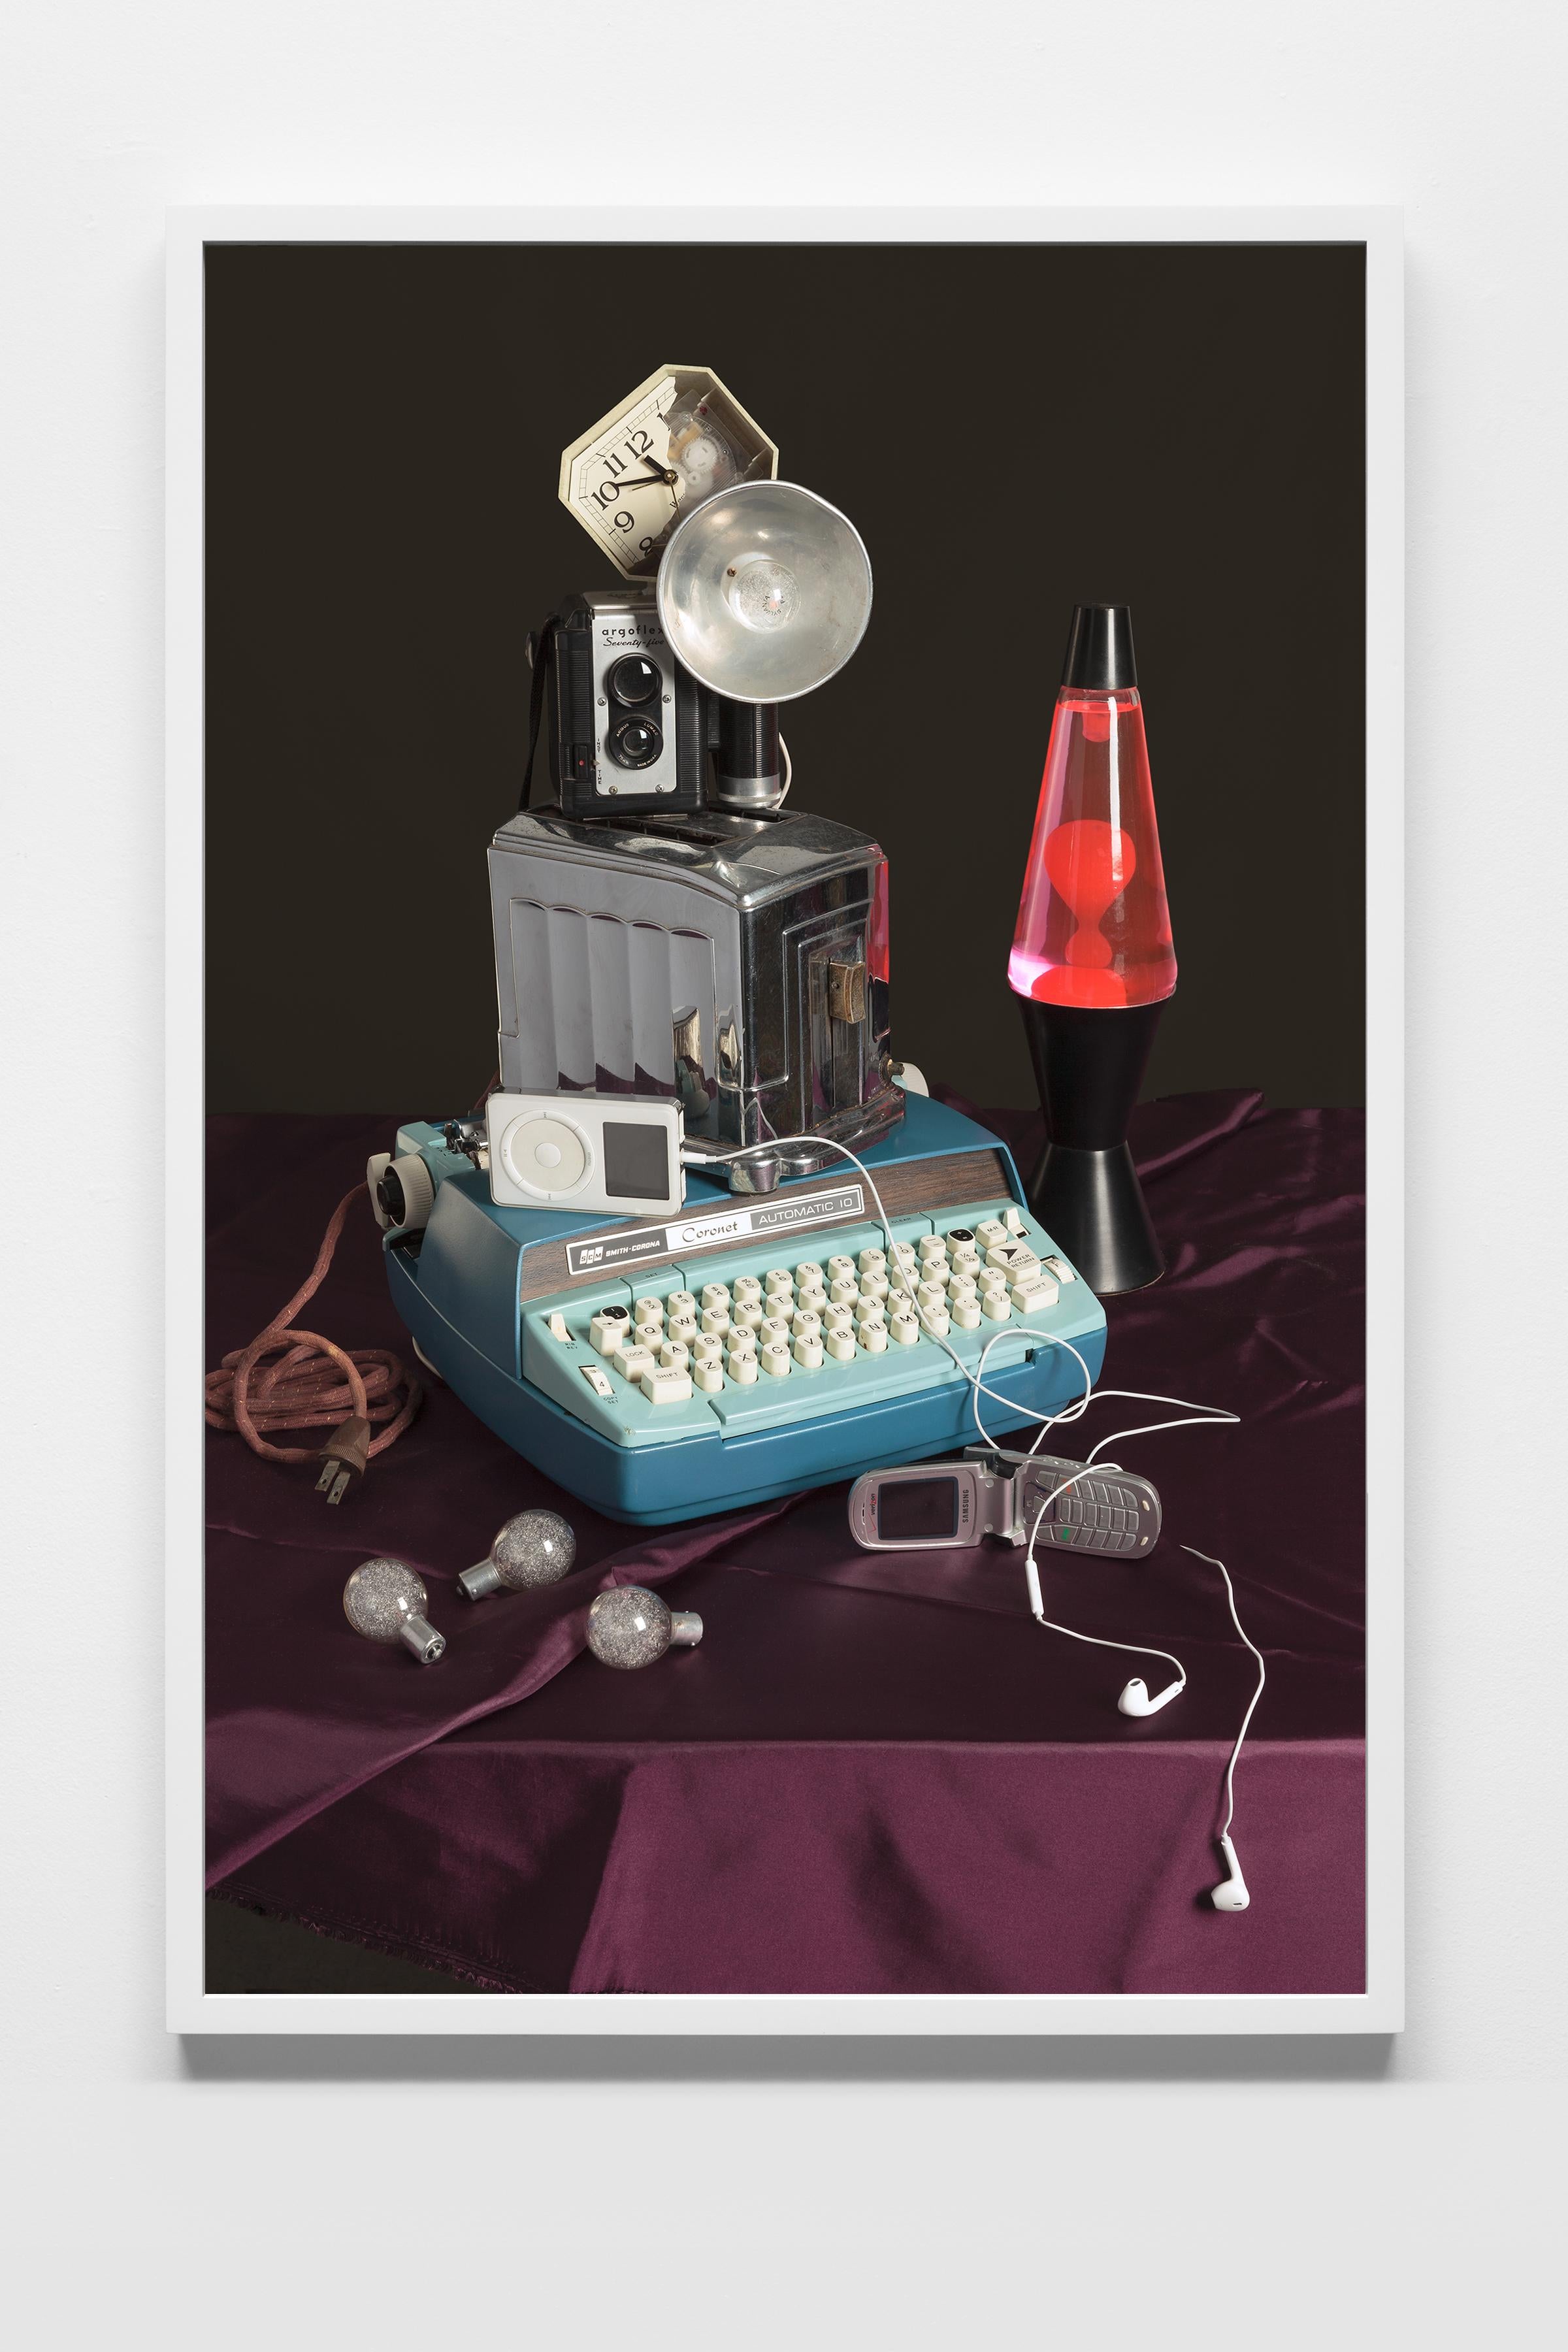 “Tech Vanitas: Blue Typewriter” Contemporary Still-life Photograph, Vintage Tech - Print by Jeanette May